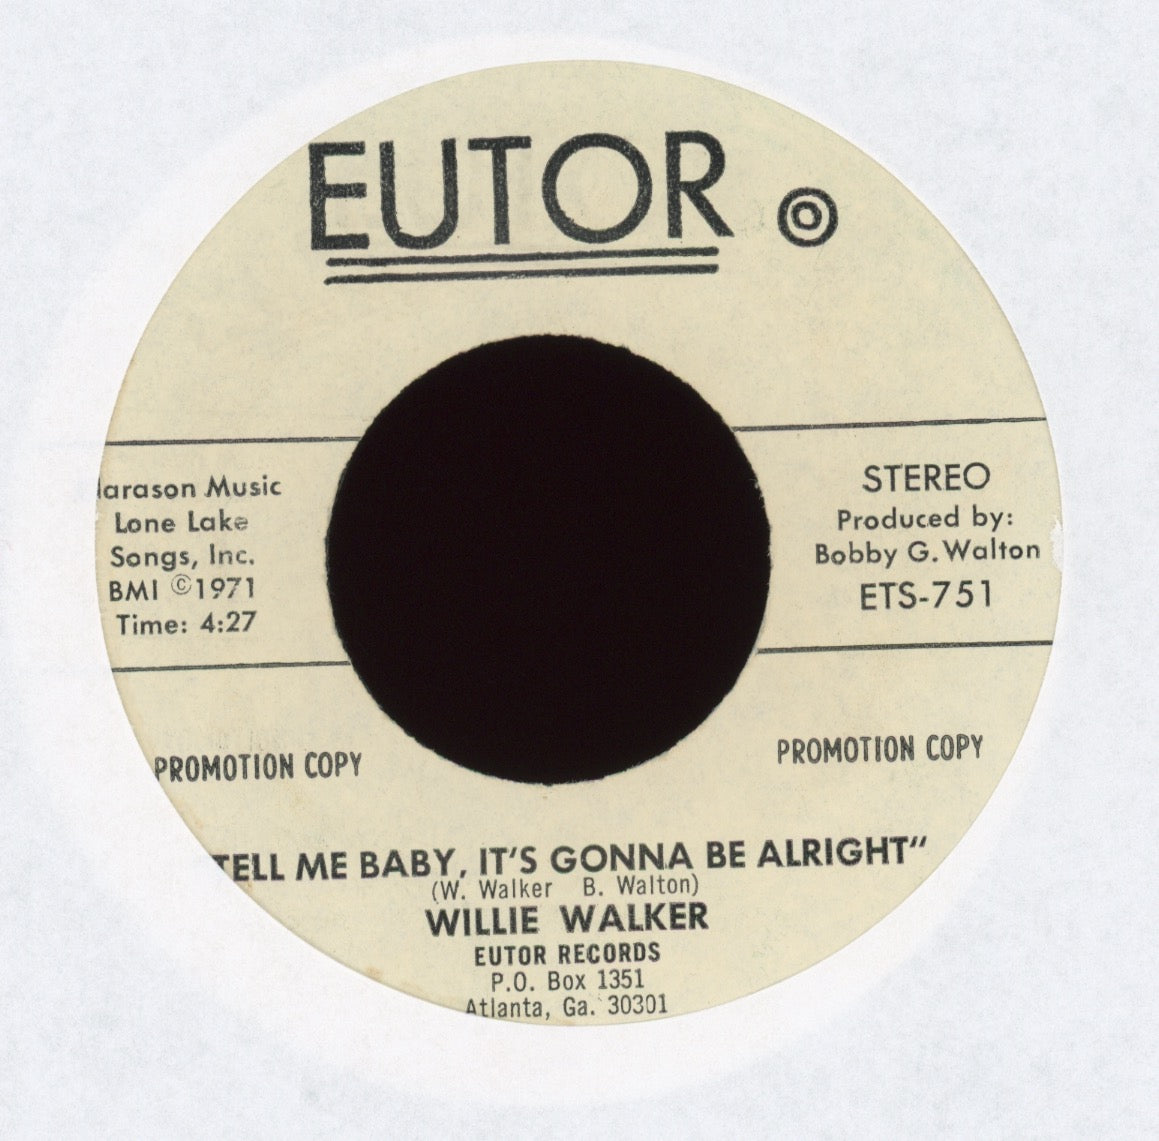 Willie Walker - Tell Me Baby, It's Gonna Be Alright on Eutor Promo